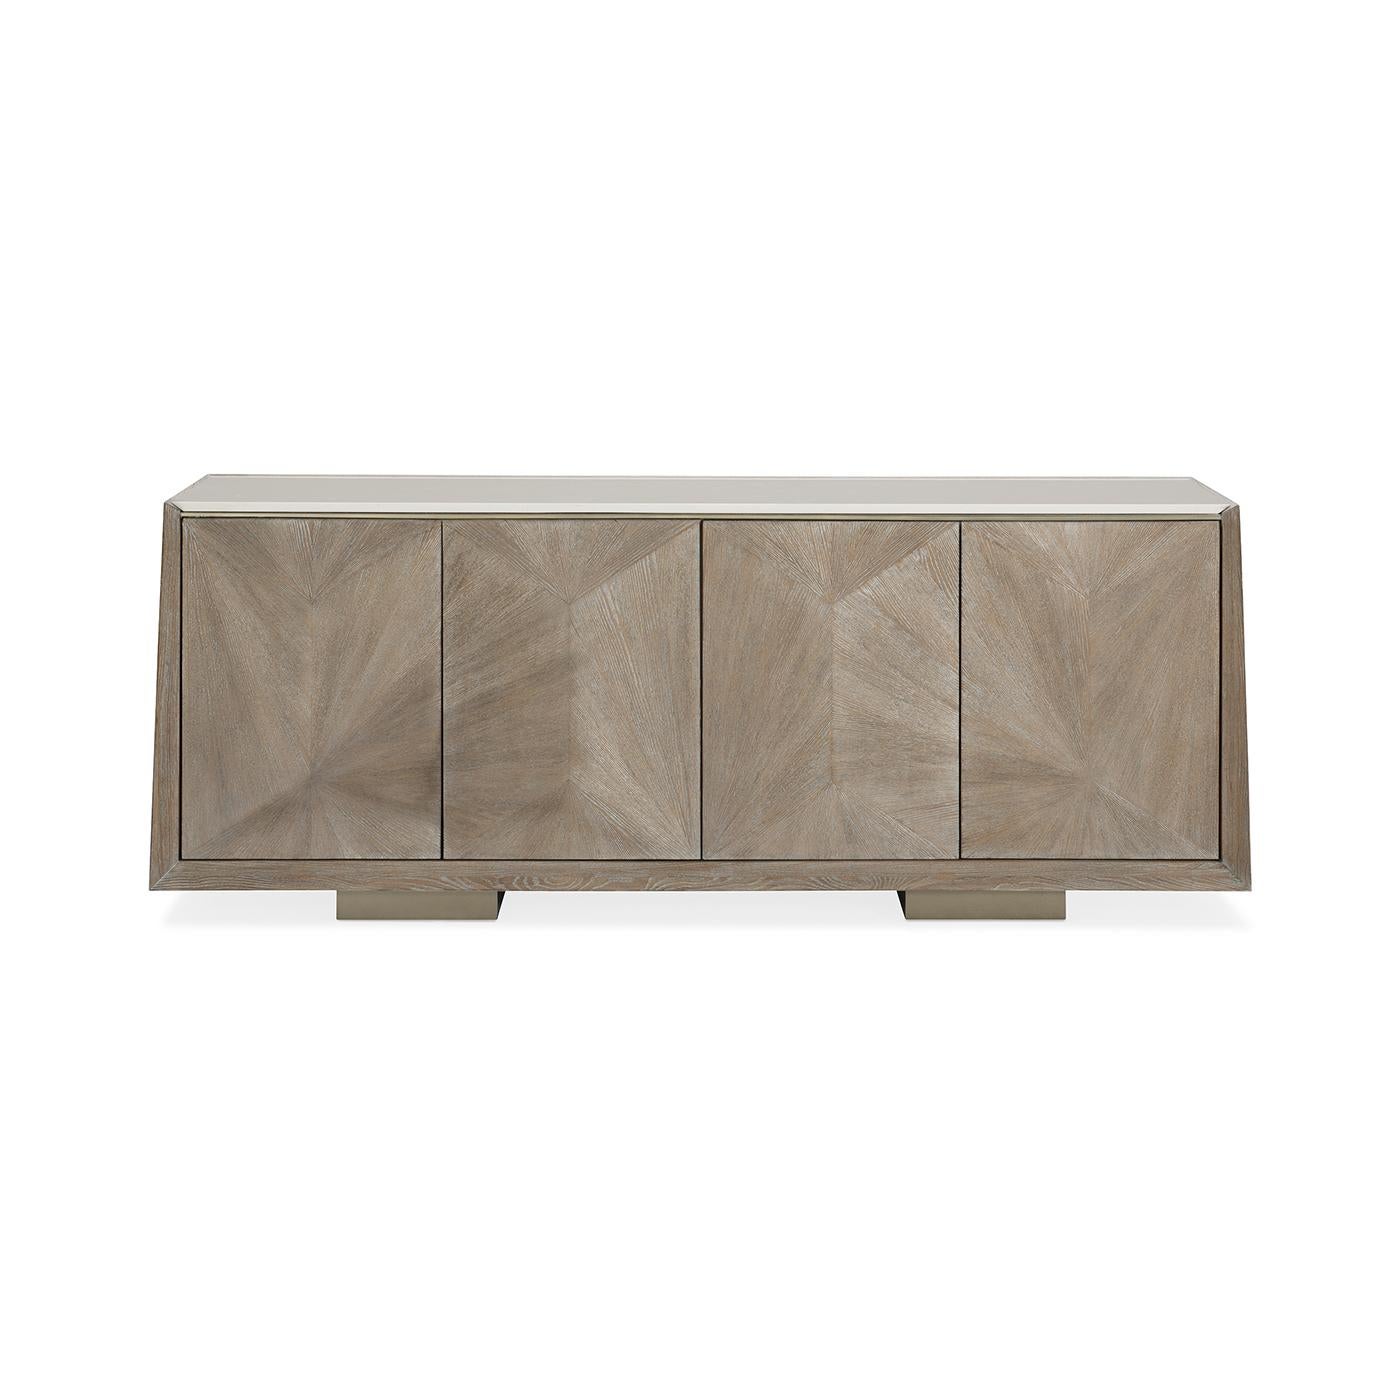 Modern Ash Buffet, a straightforward silhouette showcases its extraordinary linear veneer patterns and is topped with a cream stone top that ensures usability and durability. Block feet and a soft tonal finish of Ash Driftwood convey its relaxed